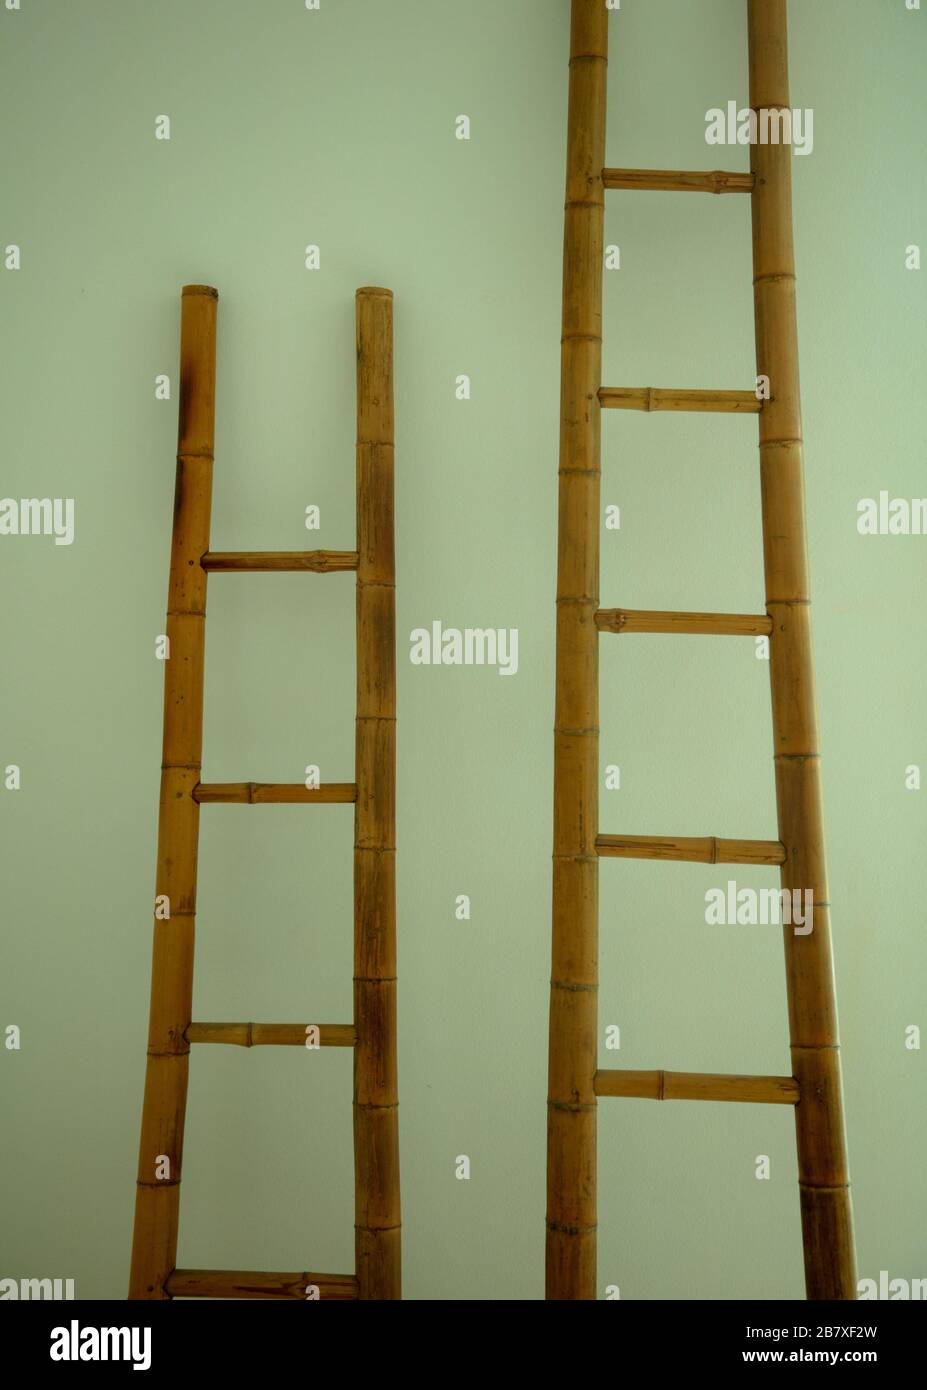 Bamboo ladder seen inside a house in Singapore Stock Photo - Alamy